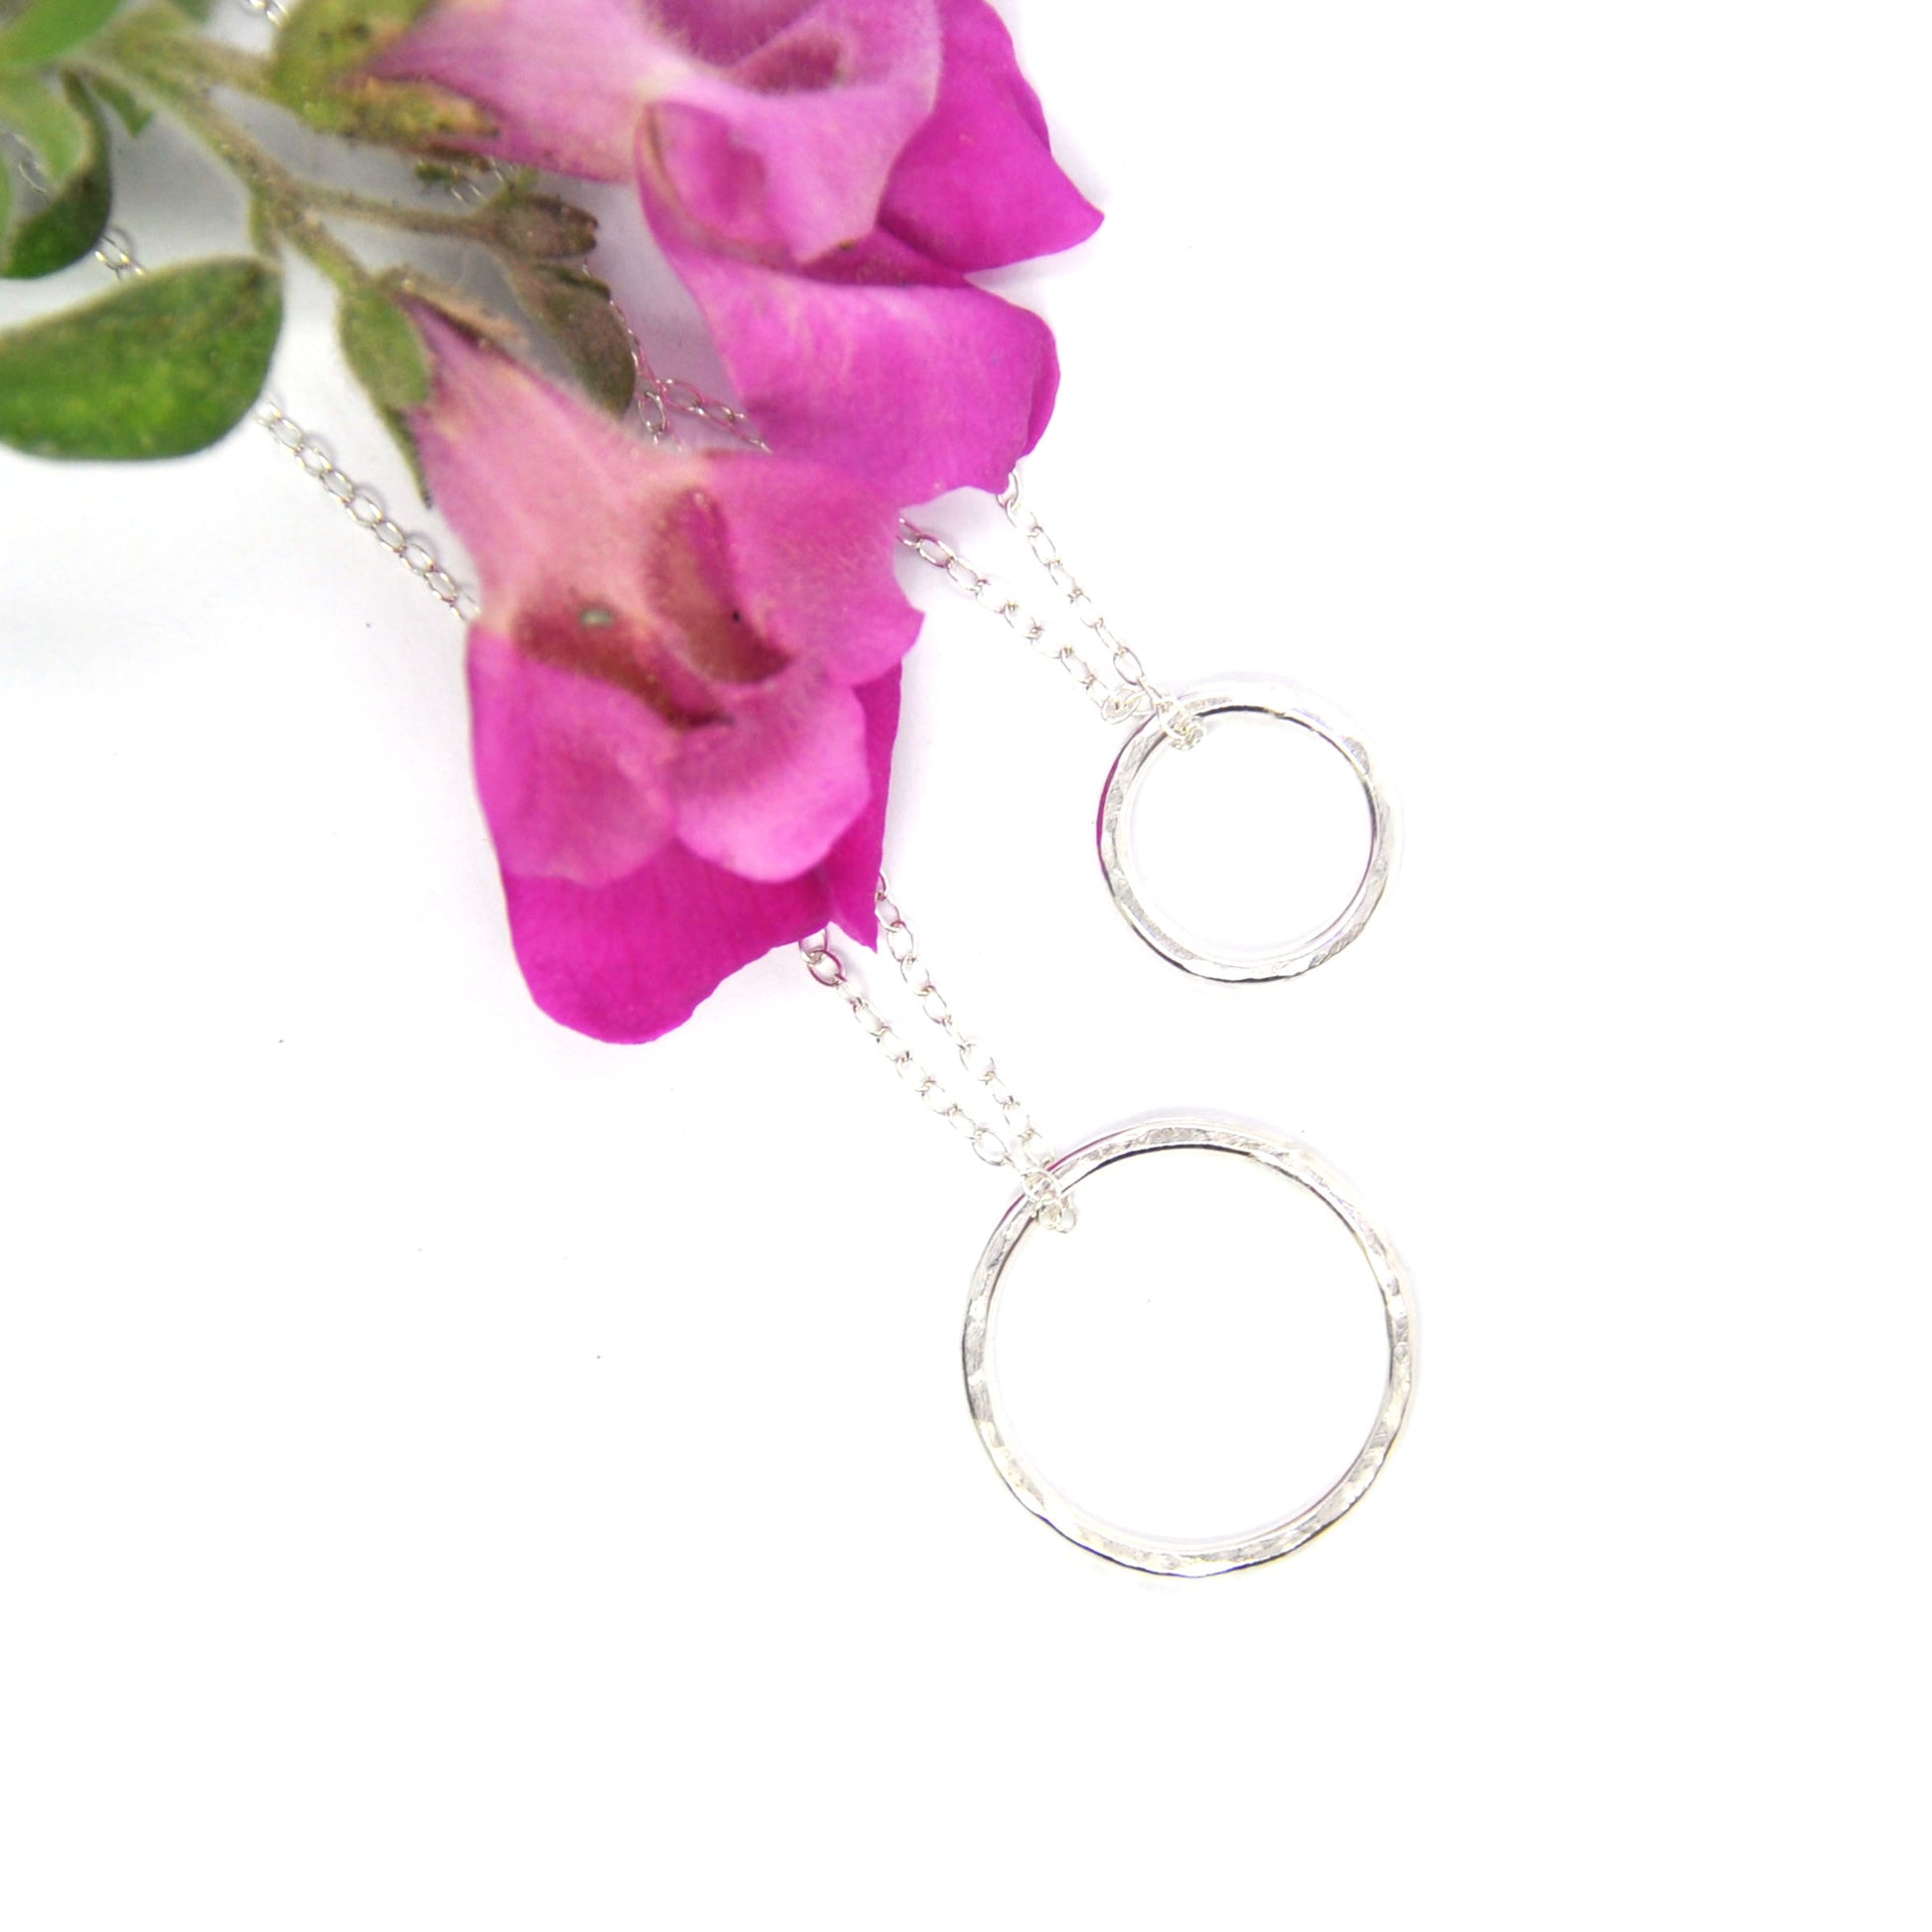 Silver hammered open circle pendant on silver chain - 2 sizes with flowers